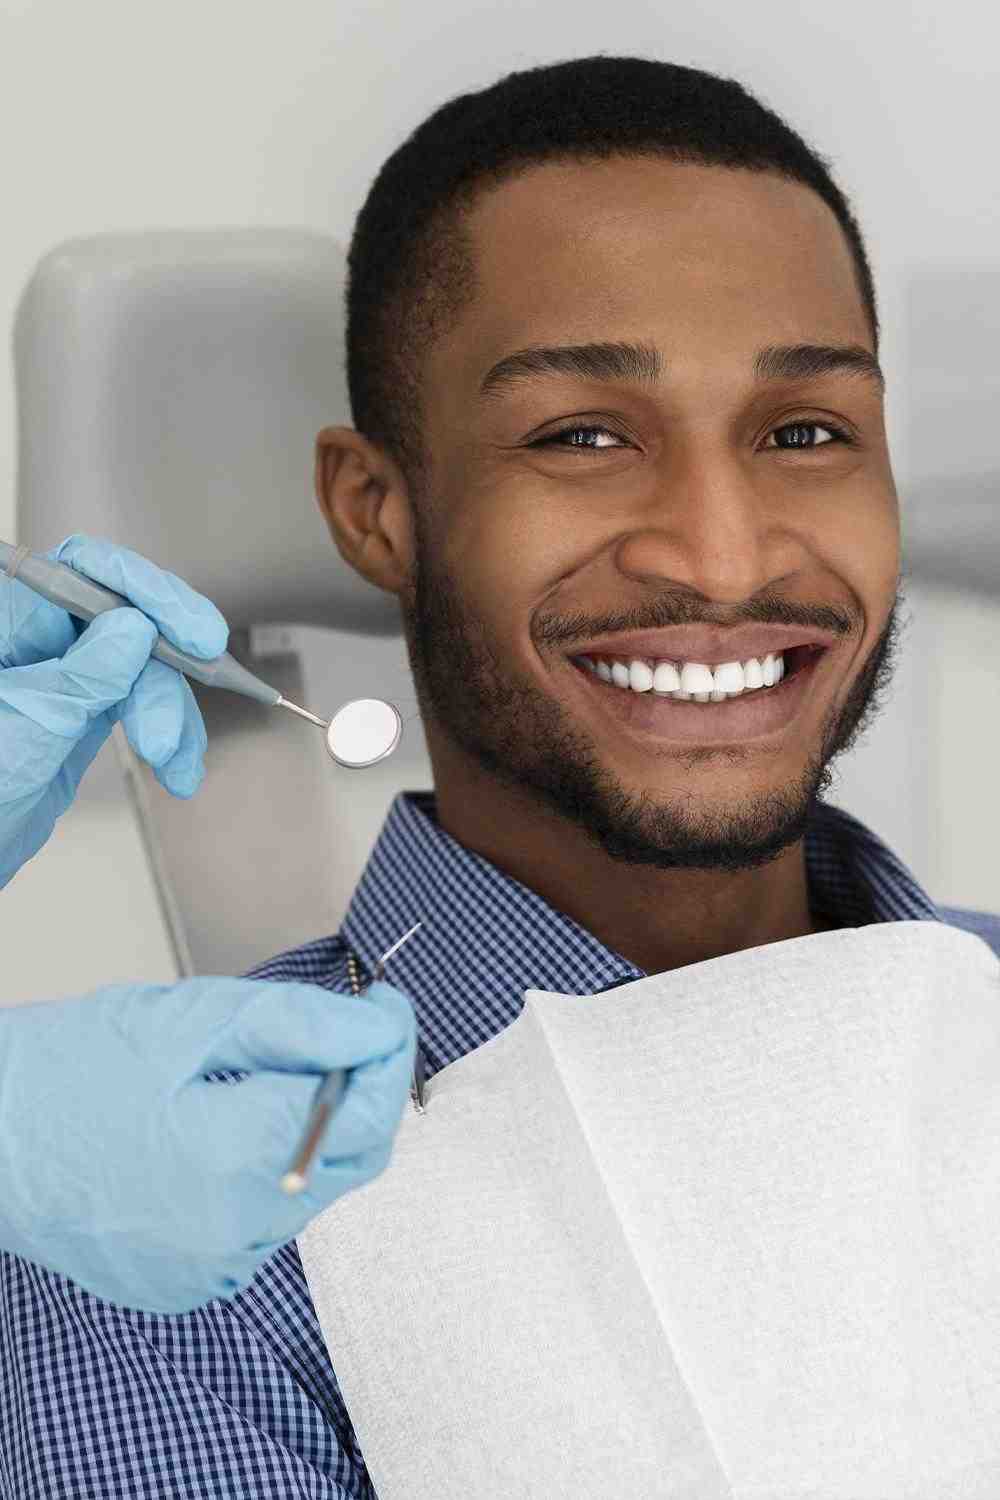 Can a dental specialist do general dentistry?